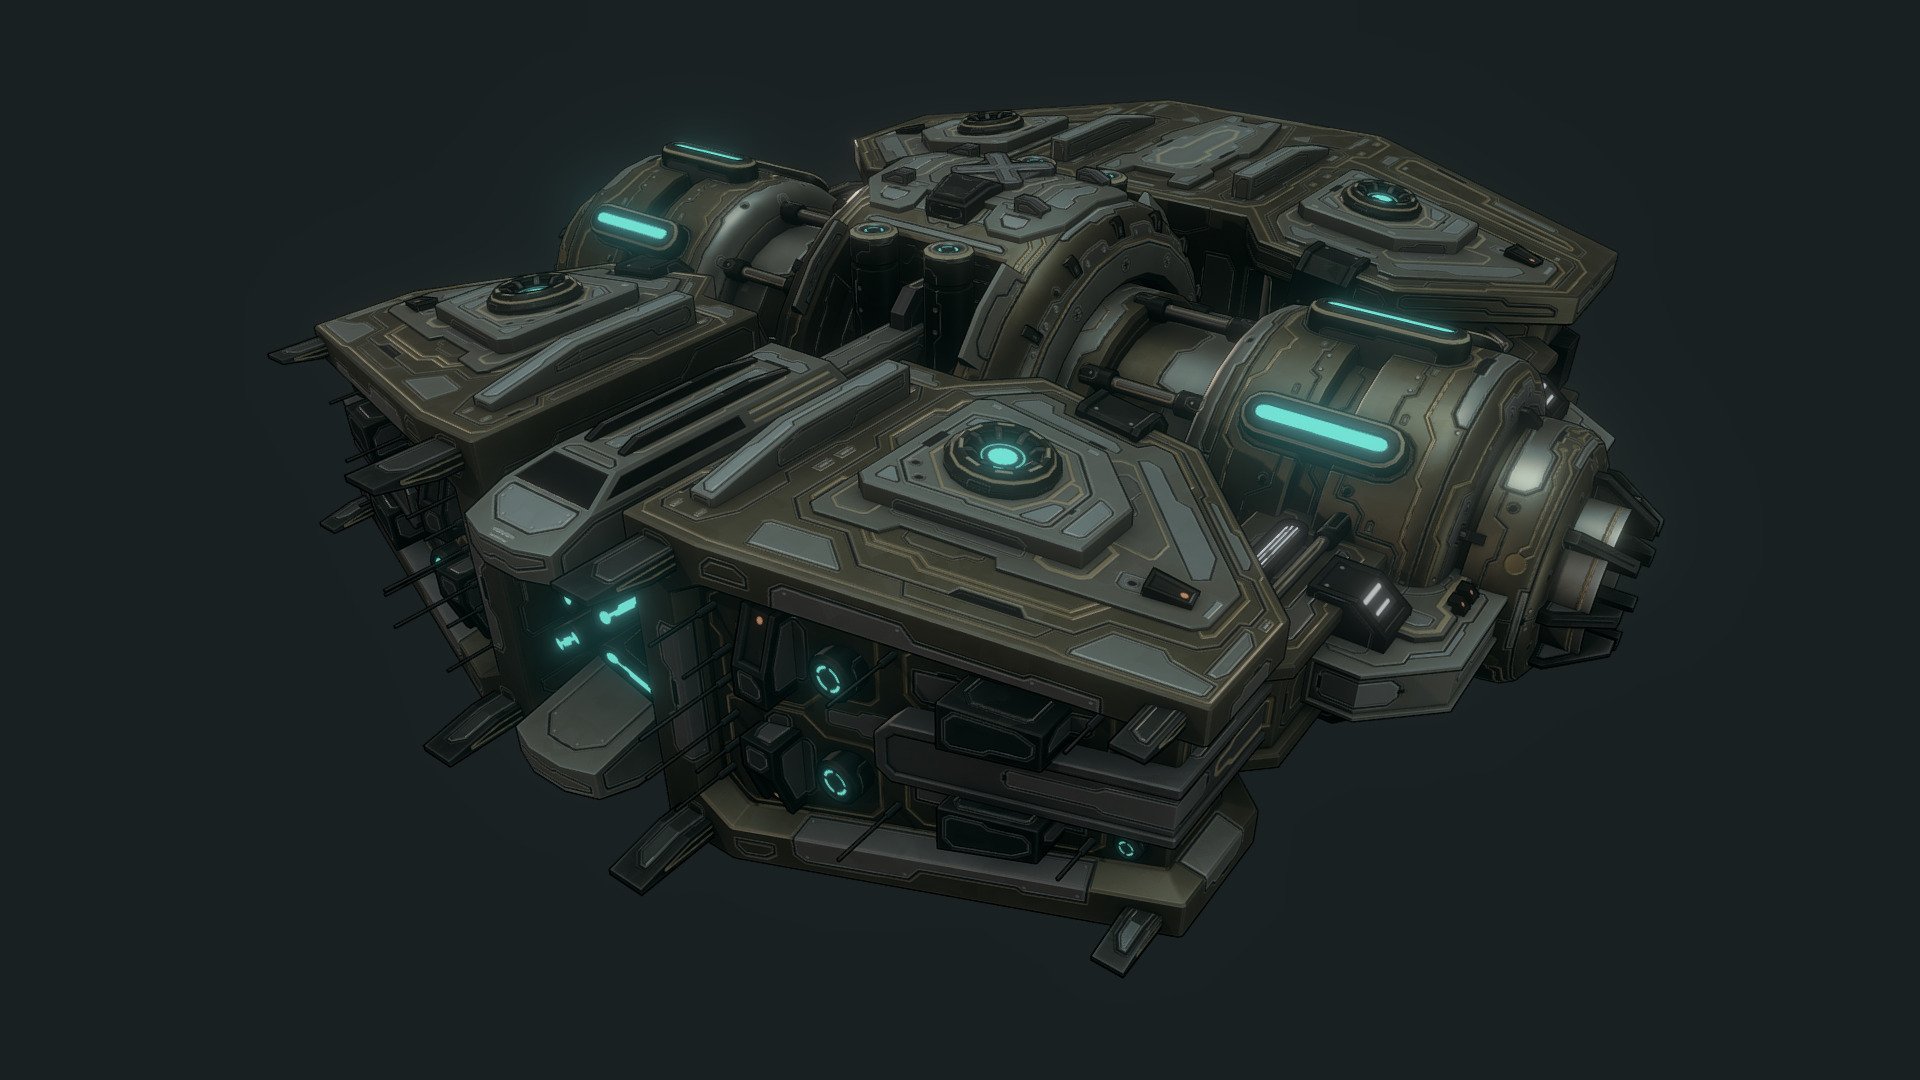 A new spaceship with a new texture approach. A mix of realistic texture and cel-shading to have a 2D/3D rendering.
Making of
The Terran Zerofighter is modeled on 3D Studio Max. Once finished, I duplicated the entire geometry, applied a flat black shader and added a thin thickness of 0.5 mm.
When the black envelope covers the entire ship, it suffices to invert the faces and make them visible only on one side (Backface cull). We obtain the inking around the volumes.

When the uv's are made to apply the textures, all you have to do is import it into 3D-Coat.
For the texture, I worked in shades of gray, purely 2D to draw everything I needed (plates, screws etc.)
All that remains is to apply clipping masks on the corresponding layers and add material, volume, etc.
The texture finished, I exported my different textures into a PBR Metalness/Roughness workflow which includes: albedo - metalness - roughness - normal - emissive 3d model